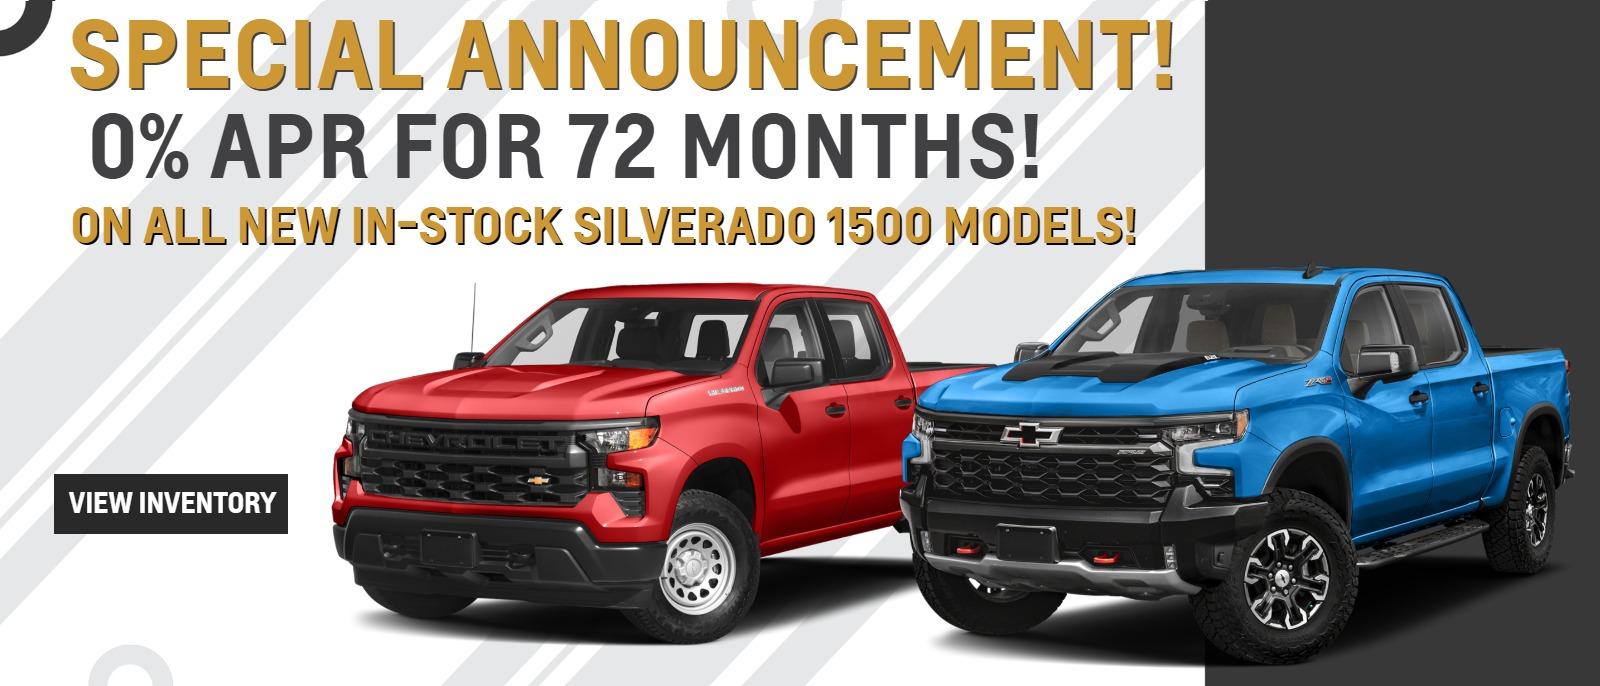 All New Silverado 1500 Models, 0% A.P.R FOR 72 MONTHS